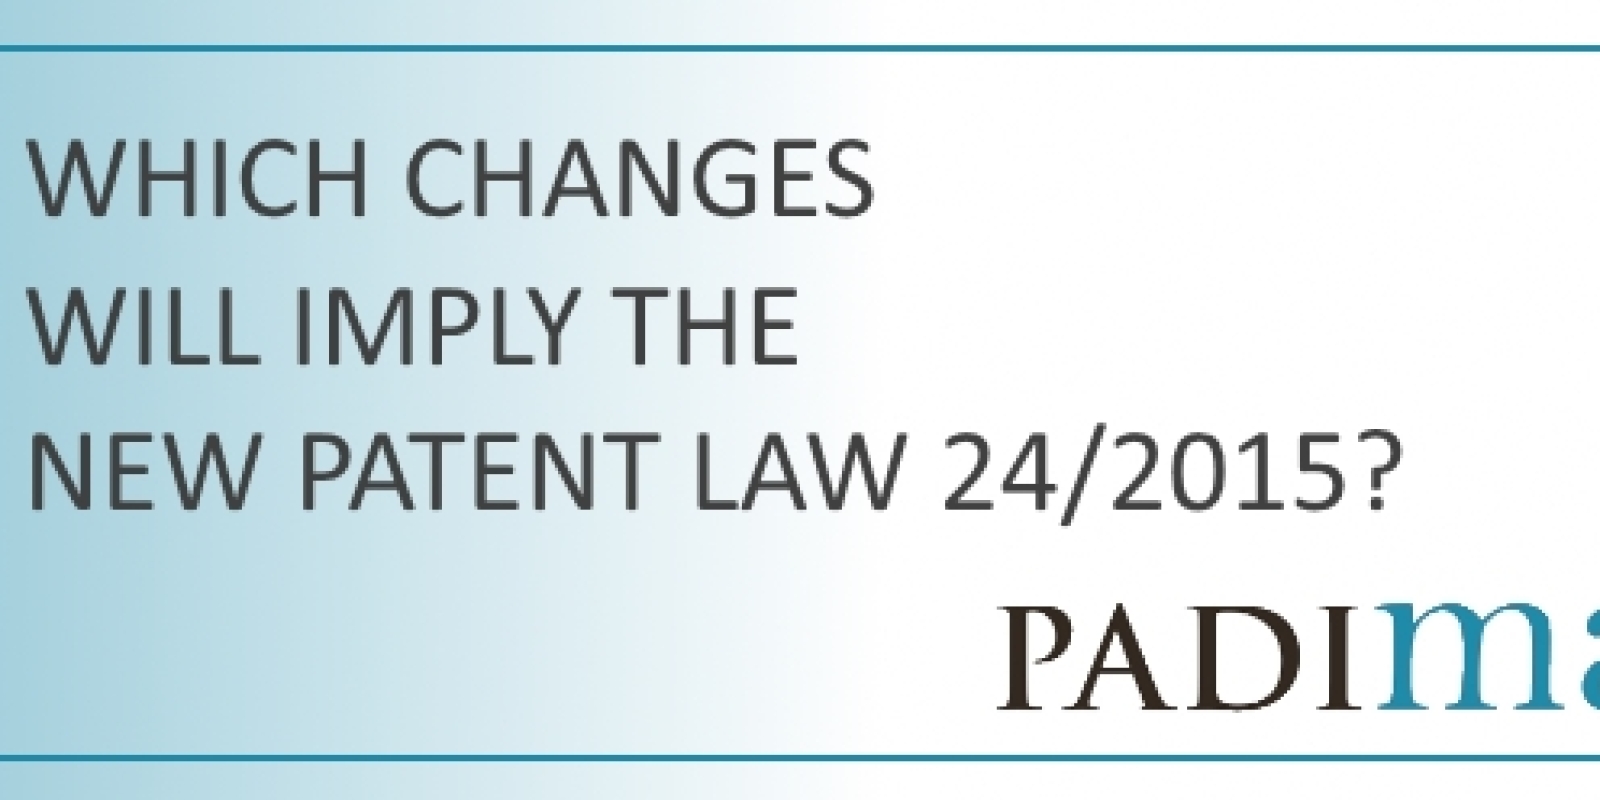 Which-changes-will-imply-the-new-Patent-Law-24-2015-PADIMA-Isabel-Ibarra